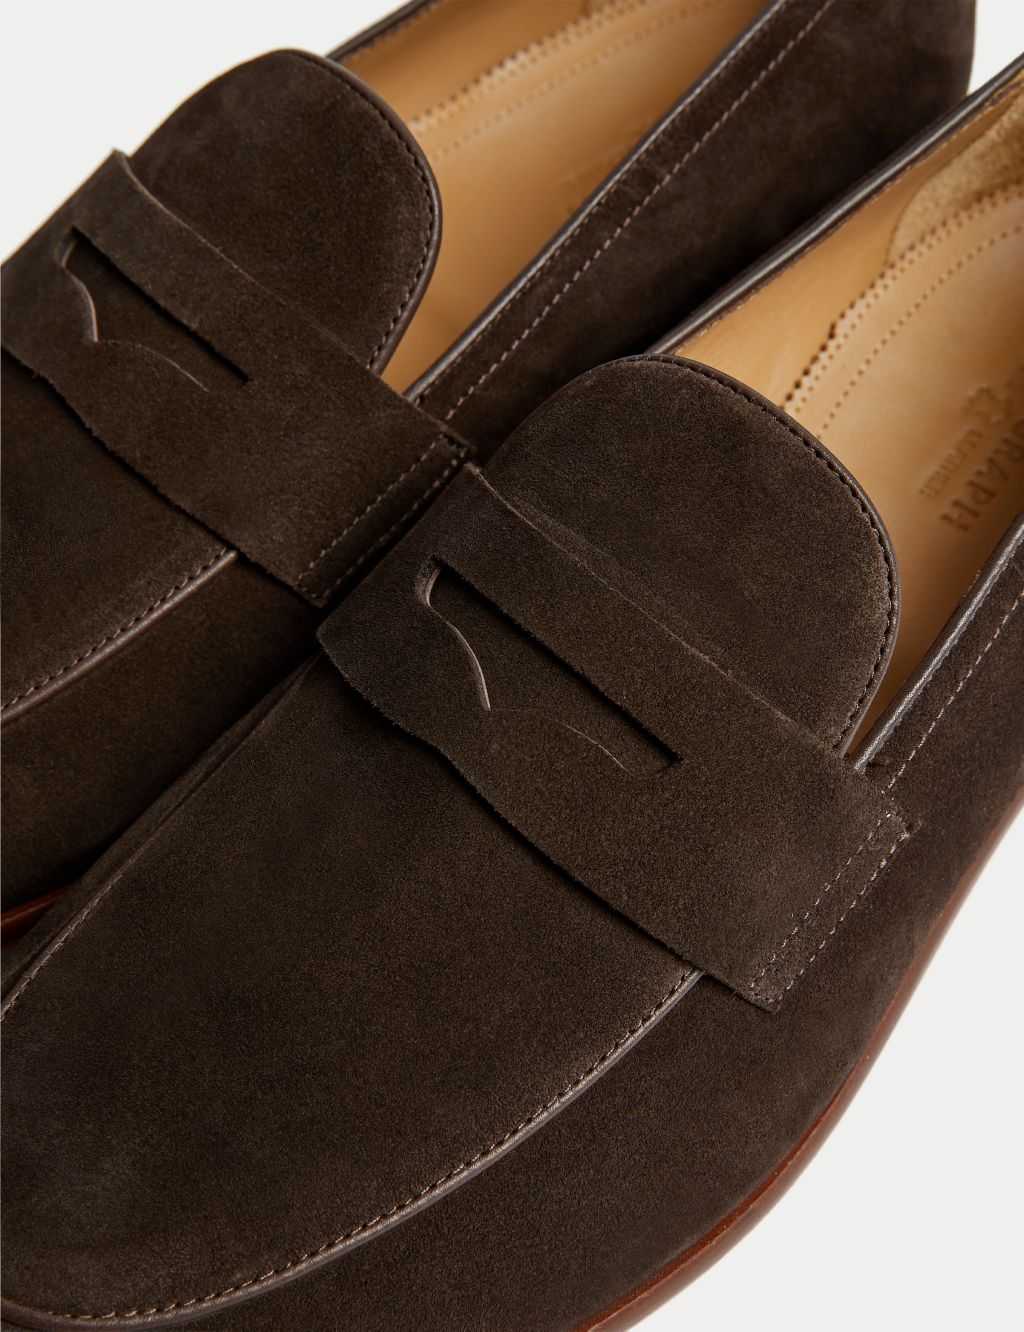 Suede Slip-On Loafers image 3